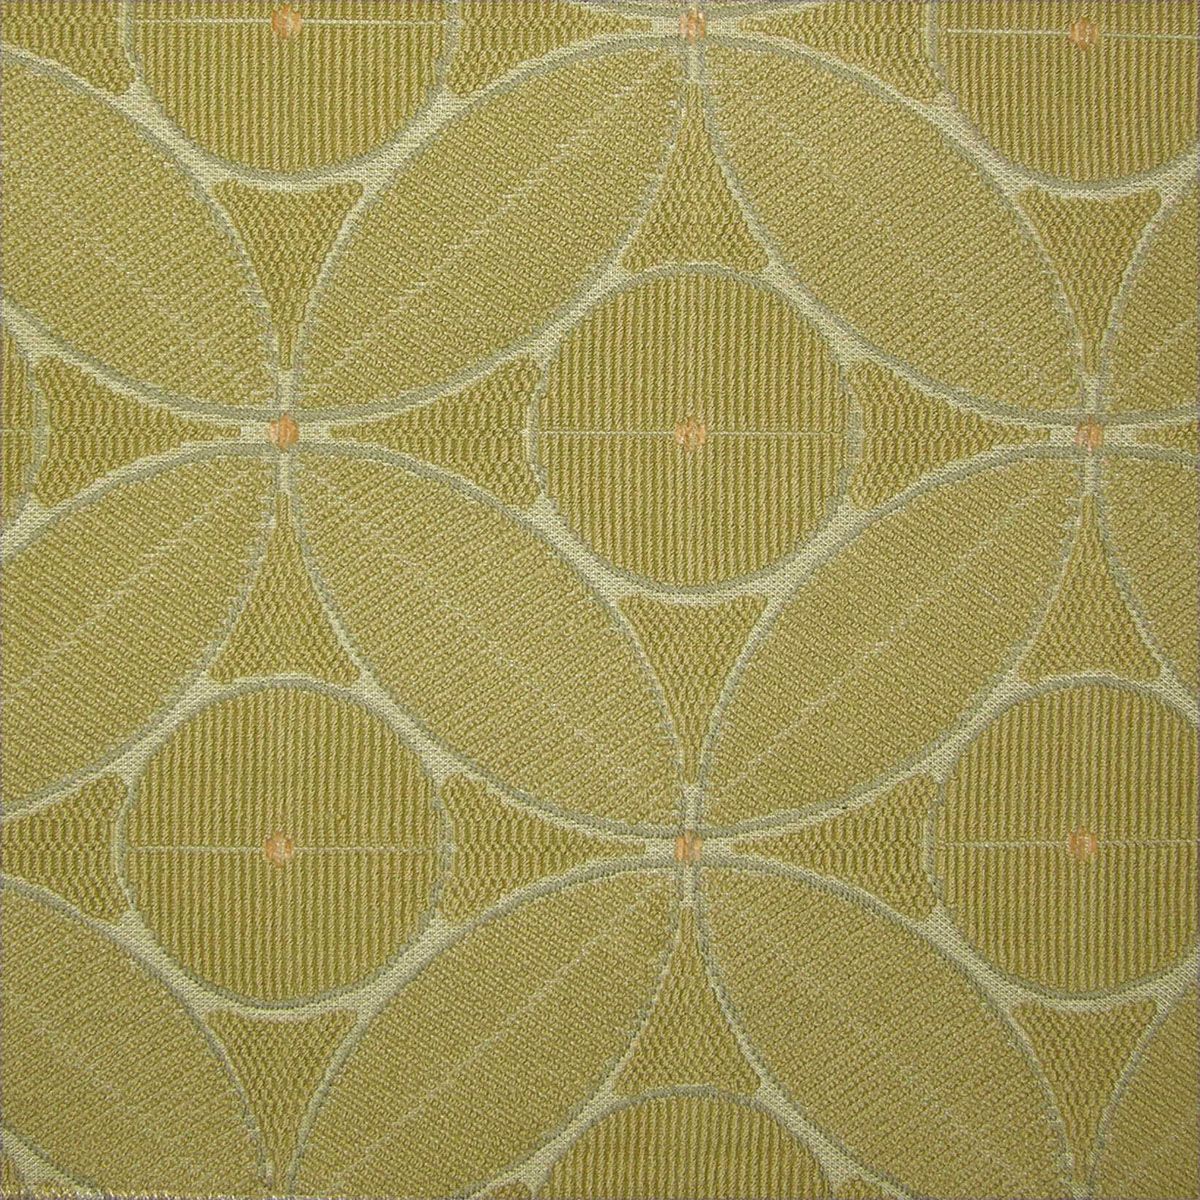 Geometry fabric in sage color - pattern number RH 00214509 - by Scalamandre in the Old World Weavers collection